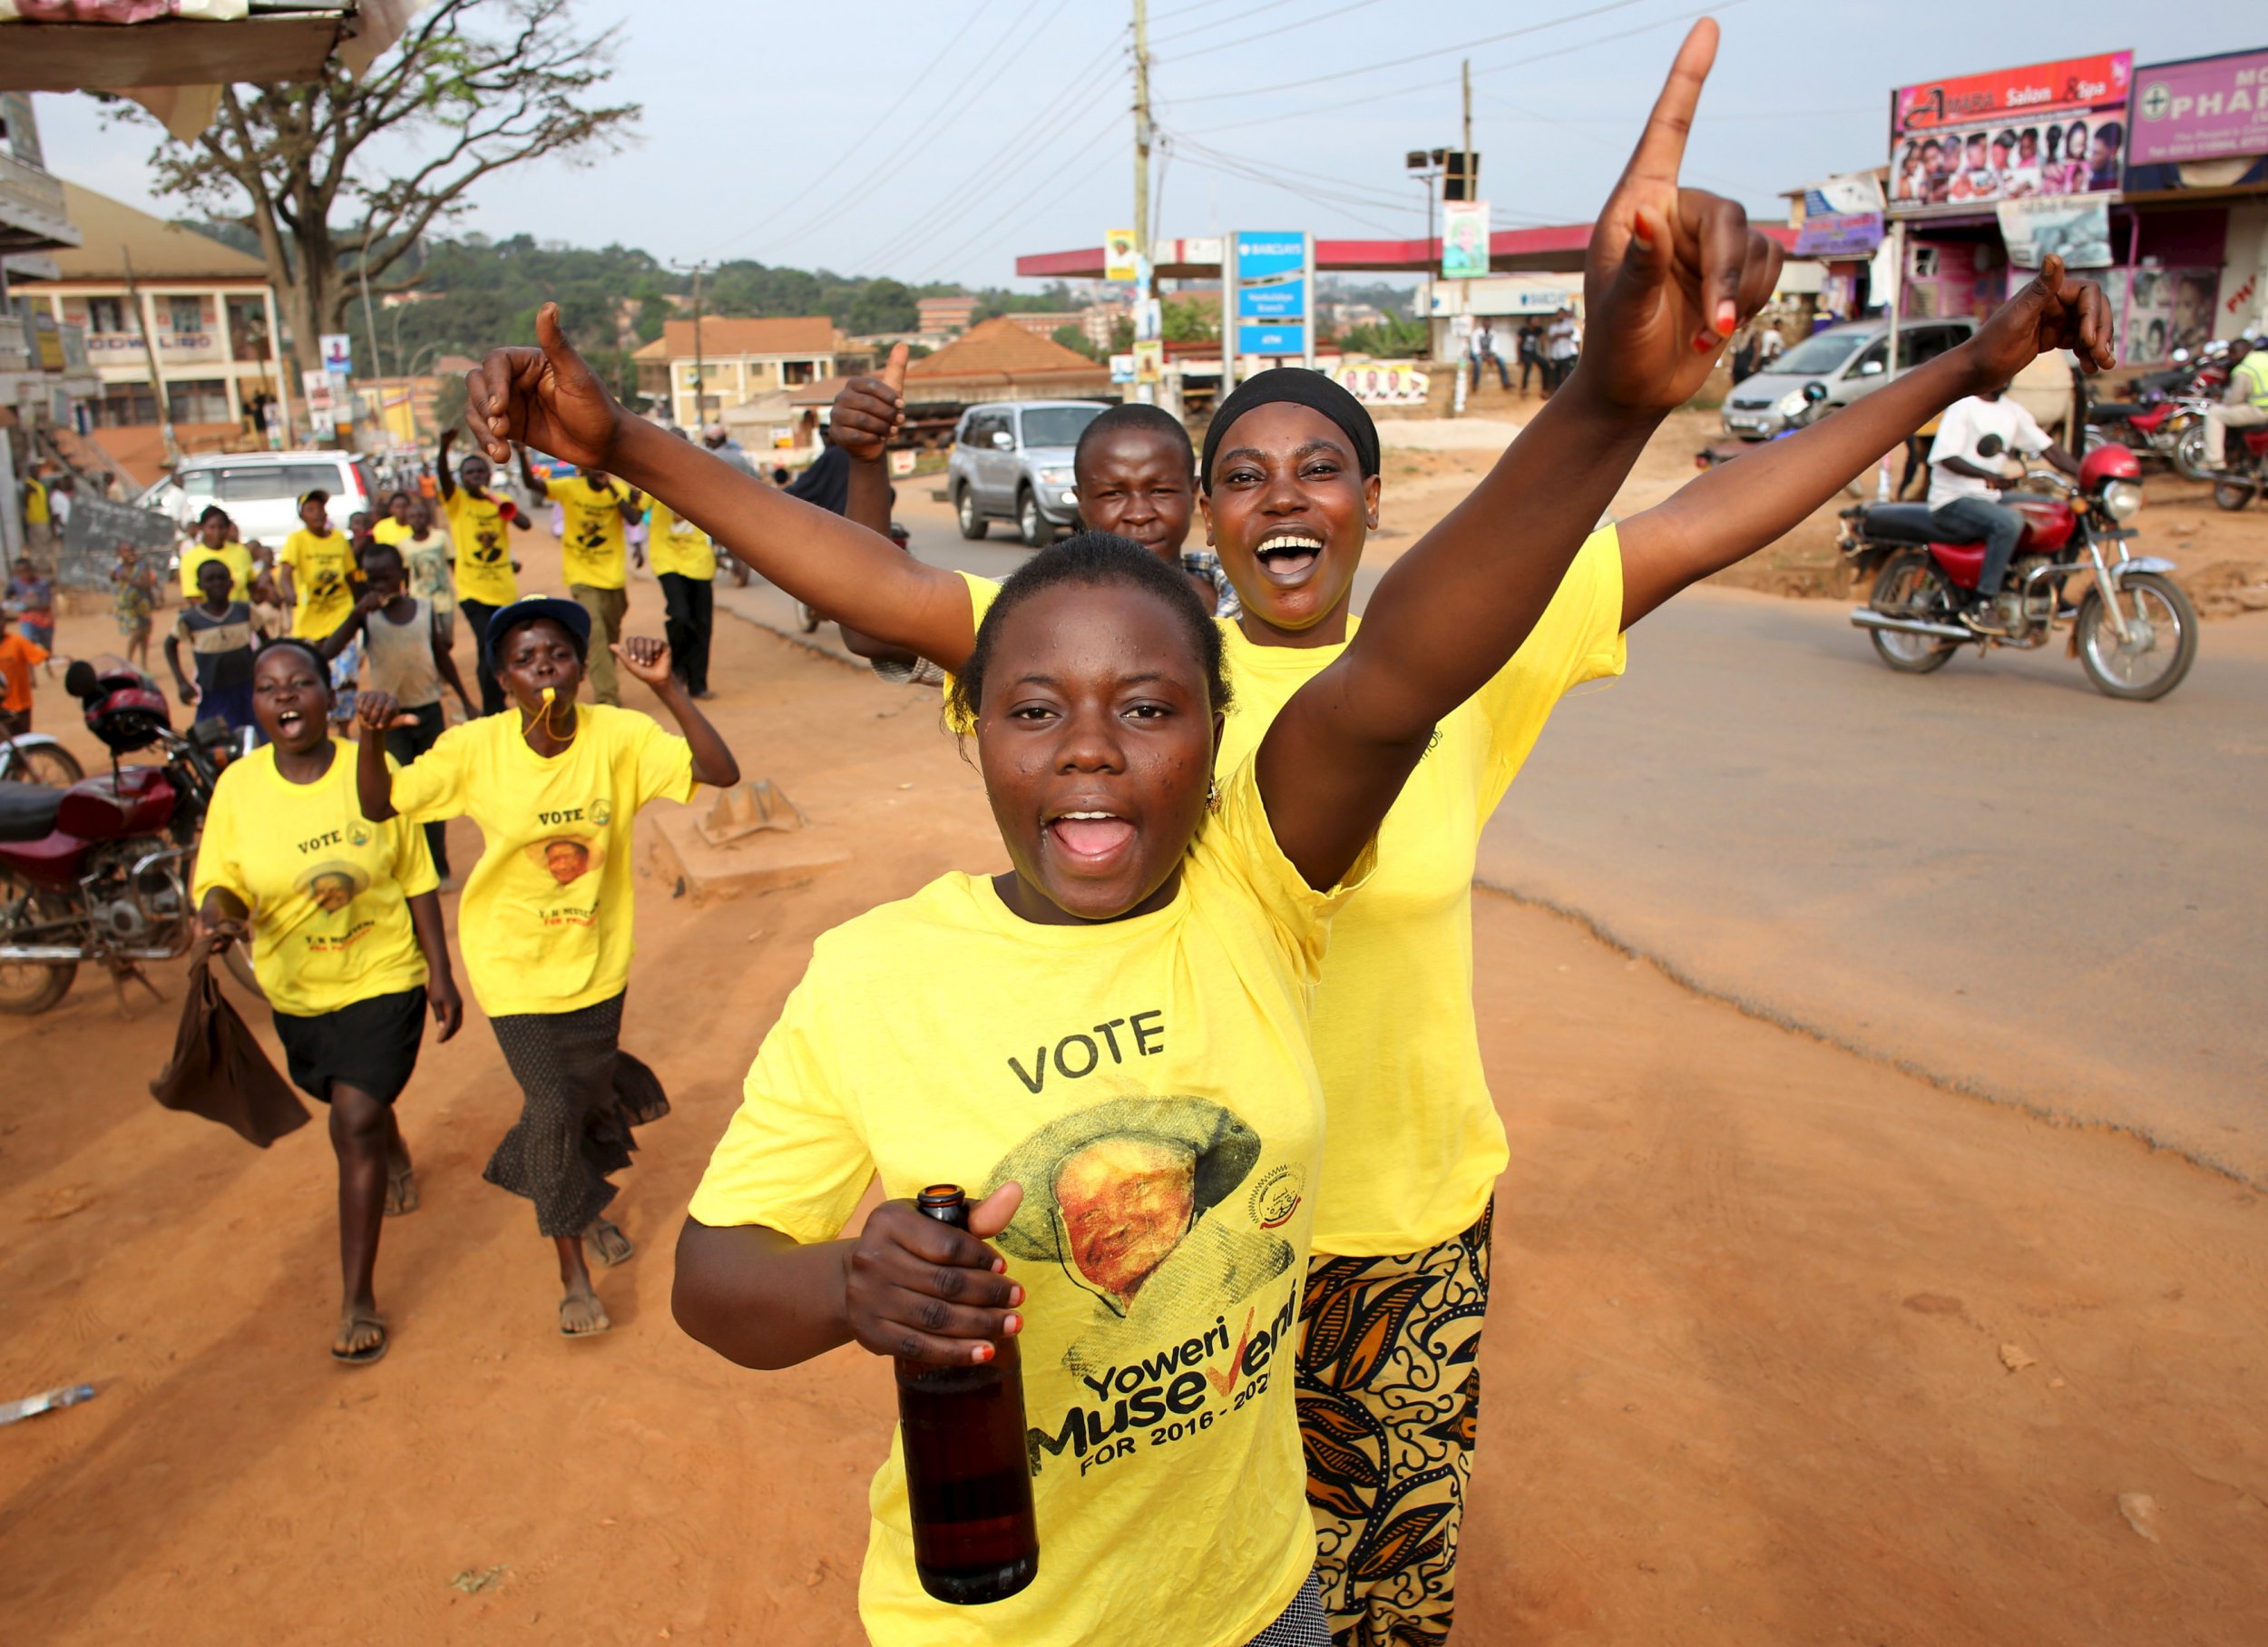 Yoweri Museveni supporters celebrate his election victory in Kampala.